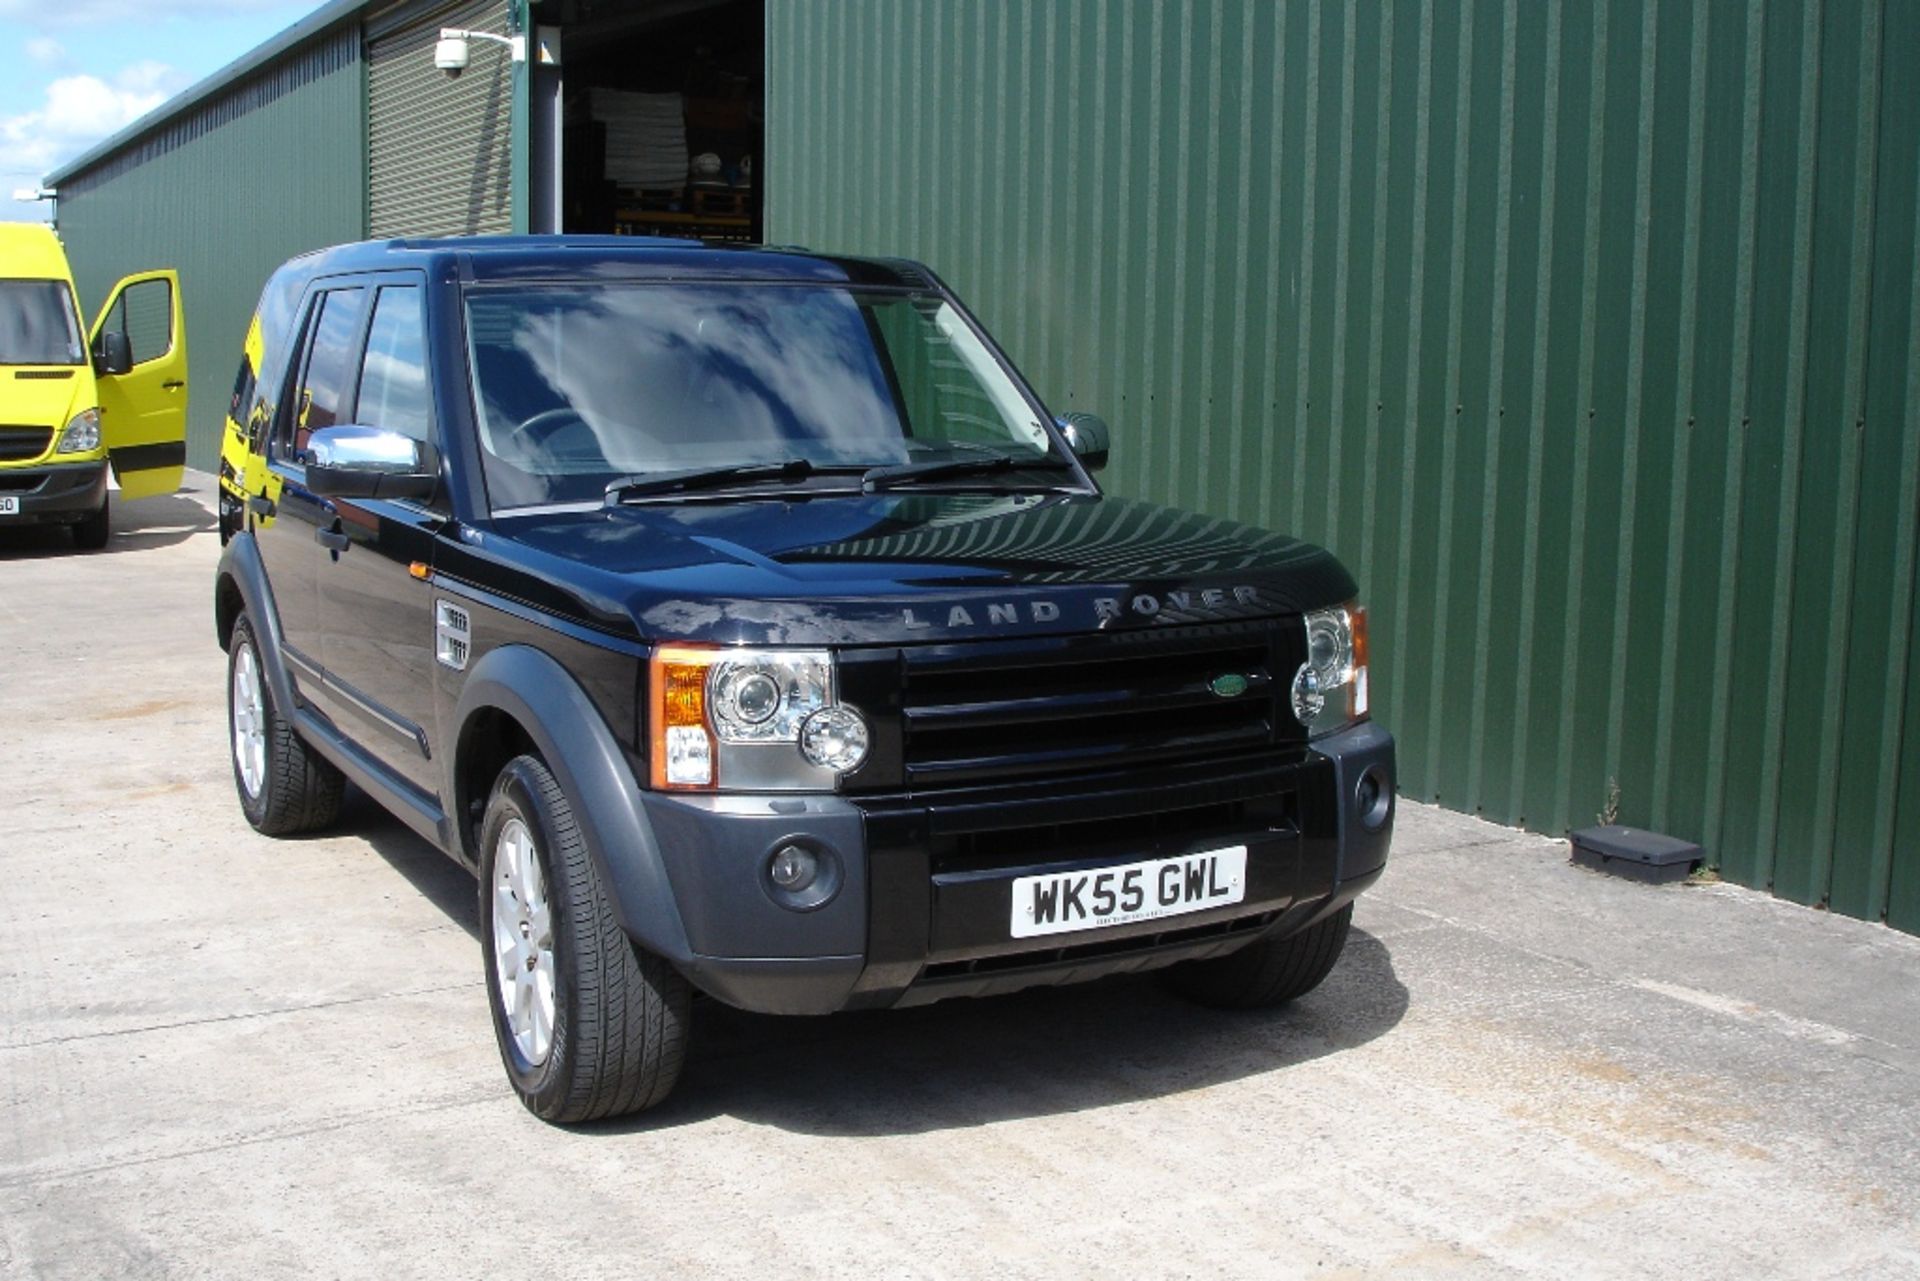 Landrover Discovery  ( 55 Plate  06 ) - Image 2 of 11